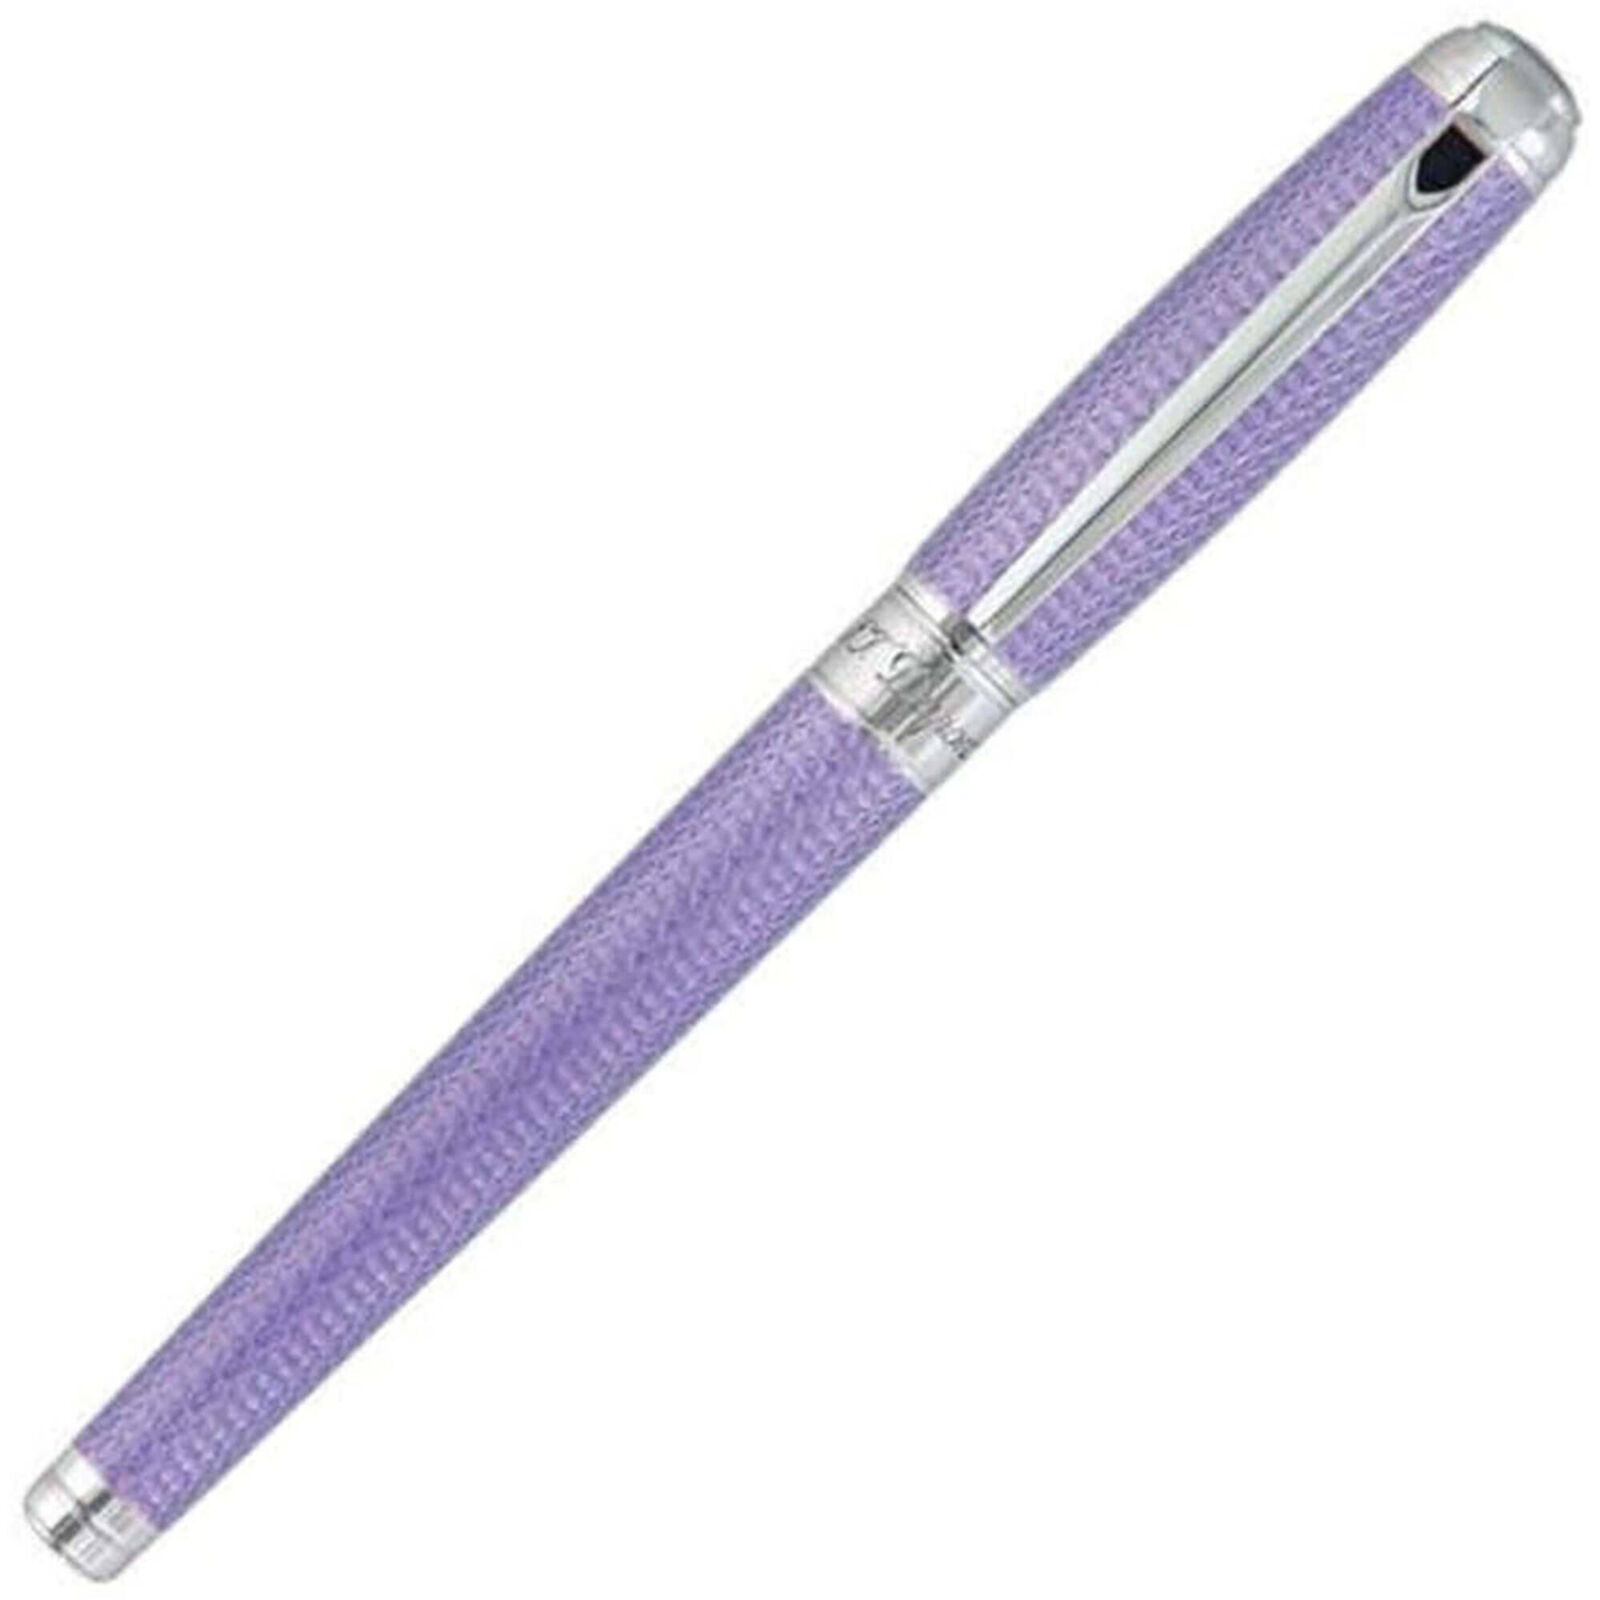 S.T. Dupont Fountain Pen Line D Firehead Guilloche Lilac and Silver DP410000L